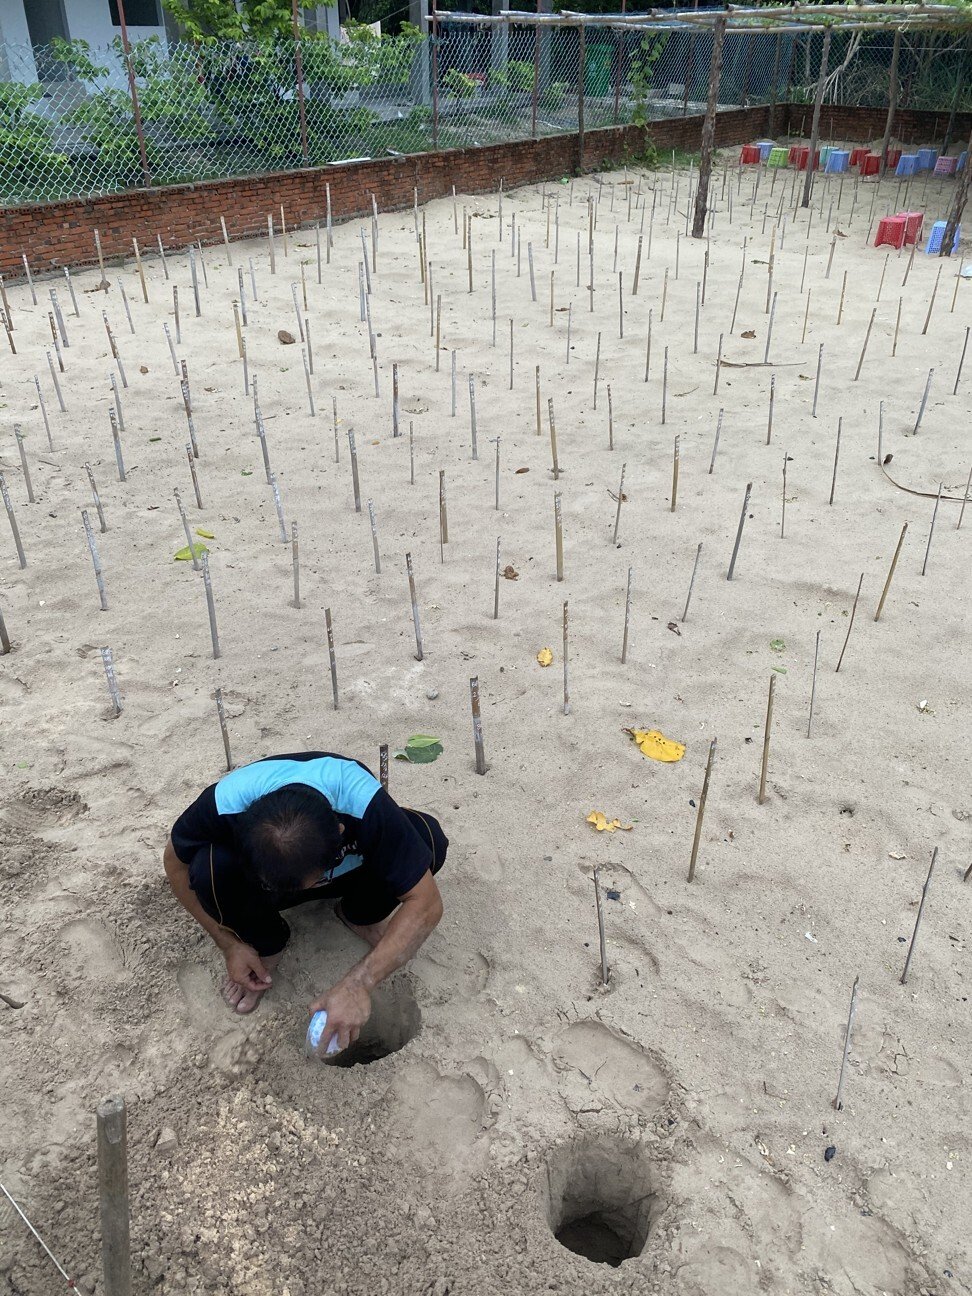 A national park worker prepares a hole for turtle eggs in the incubation ground. Photo: Patrick Scott